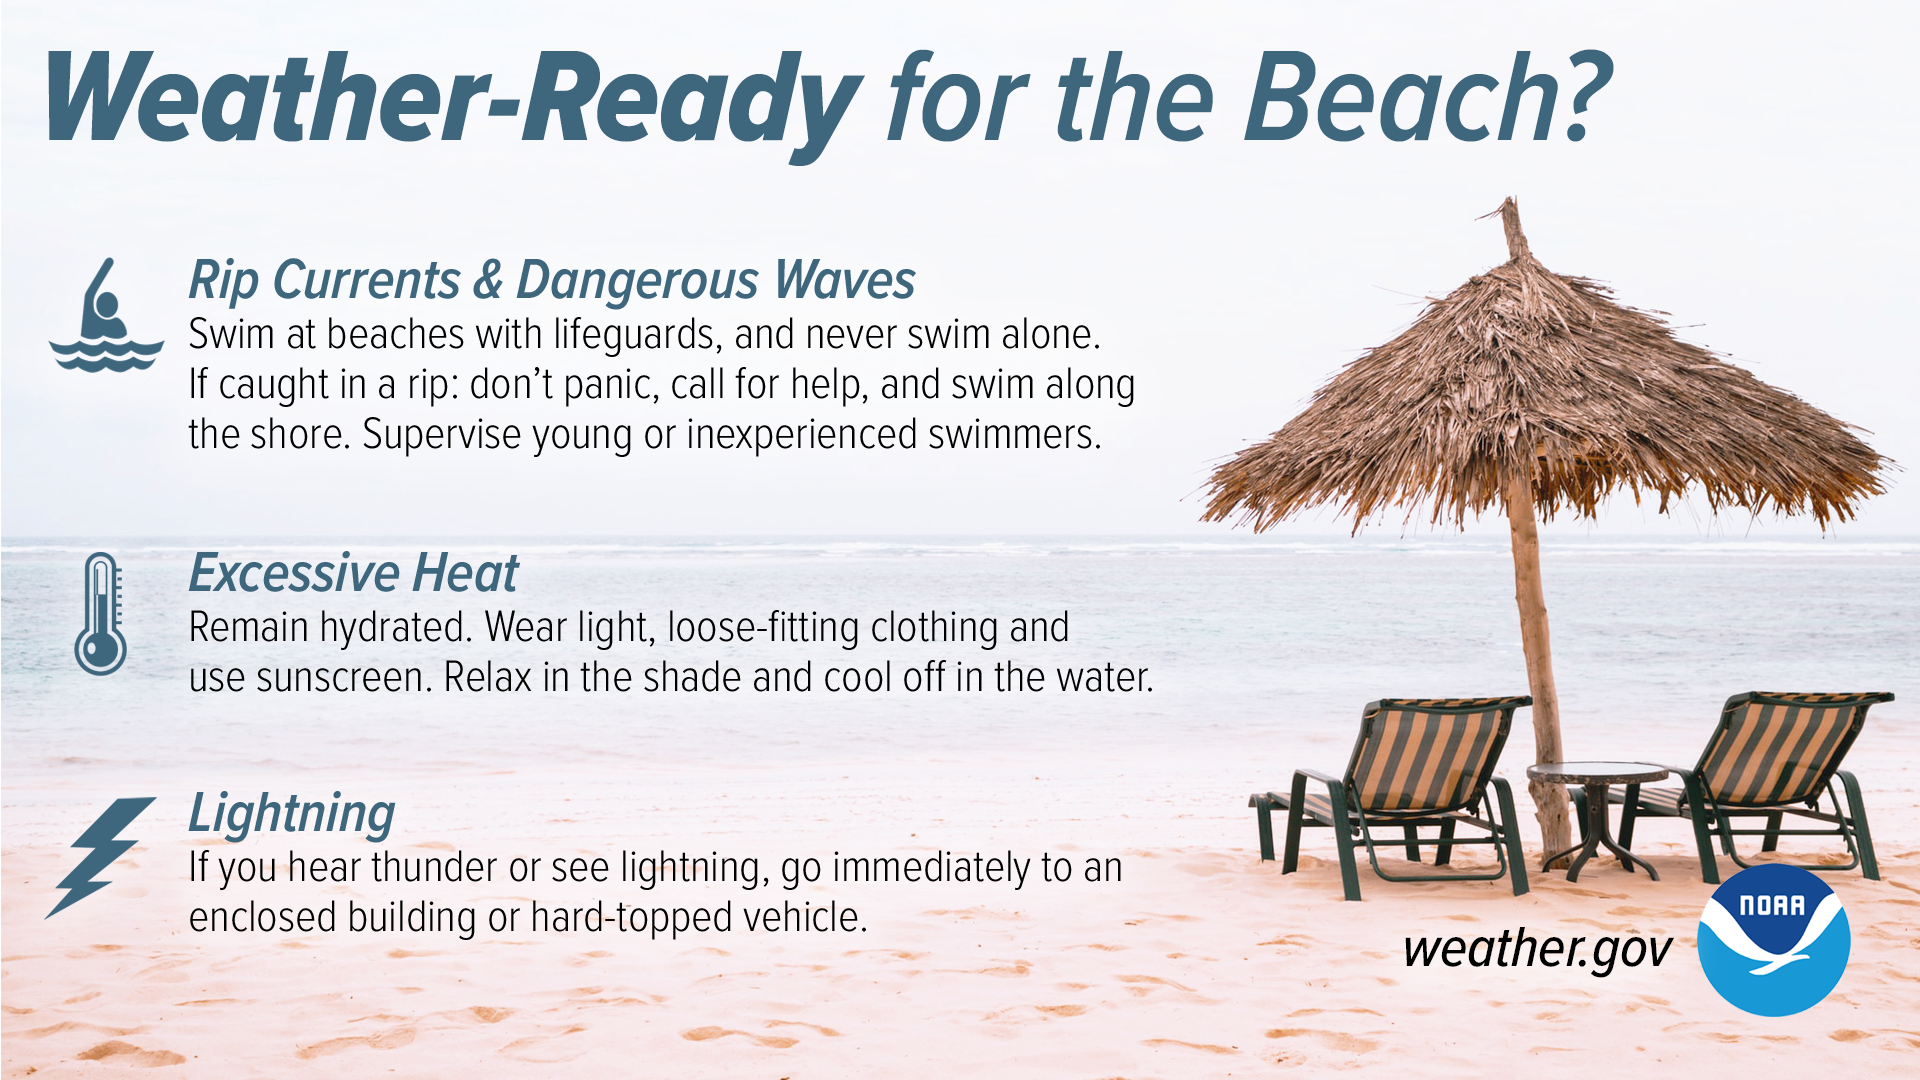 Weather-Ready for the Beach? 1. Rip currents & dangerous waves: Swim at beaches with lifeguards, and never swim alone. If caught in a rip, don't panic, call for help, and swim along the shore. Supervise young or inexperienced swimmers. 2. Excessive Heat: Remain hydrated. Wear light, loose-fitting clothing and use sunscreen. Relax in the shade and cool off in the water. 3. Lightning: If you hear thunder or see lightning, go immediately to an enclosed building or hard-topped vehicle.